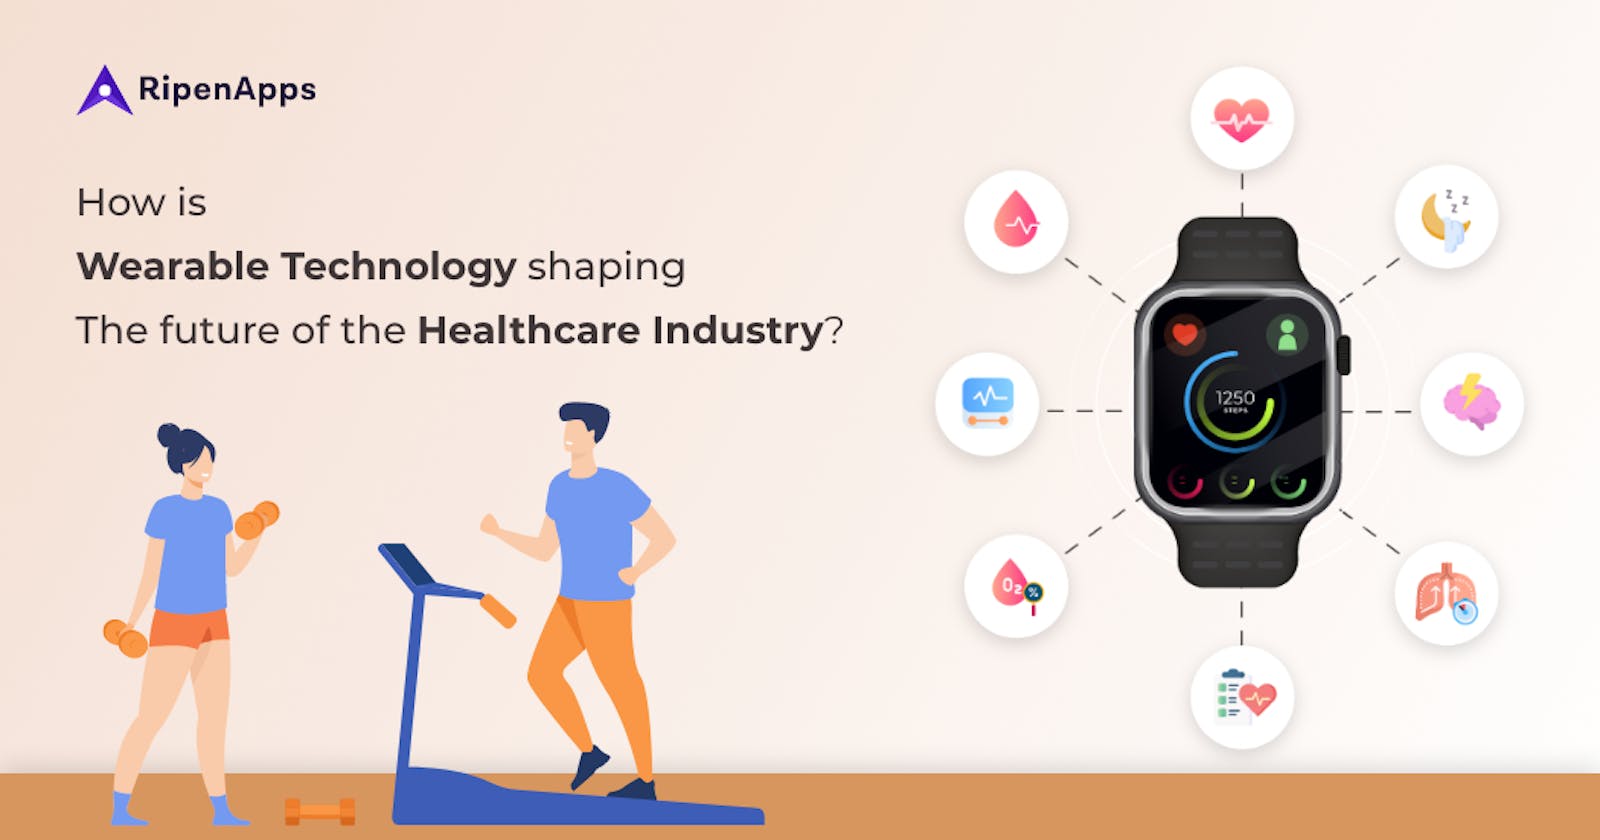 Benefits of Wearable Technology in Healthtech